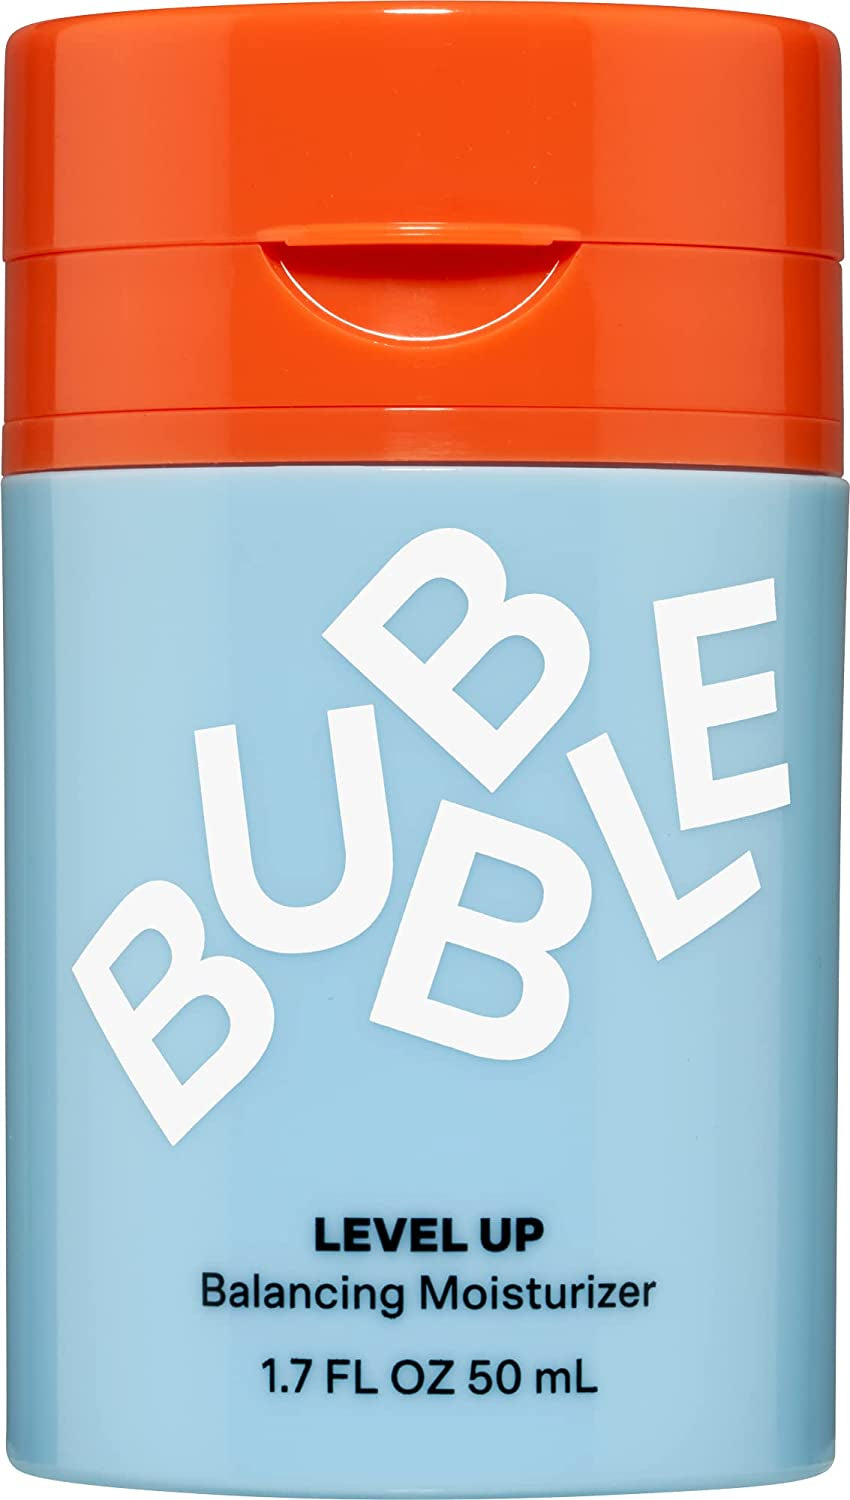 Bubble Skincare Level up Balancing Face Moisturizer - Hydrating Gel Moisturizer Formulated with Zinc PCA + Niacinamide for Improved Texture & Radiance - Skin Care for Oily or Combination Skin (50Ml)